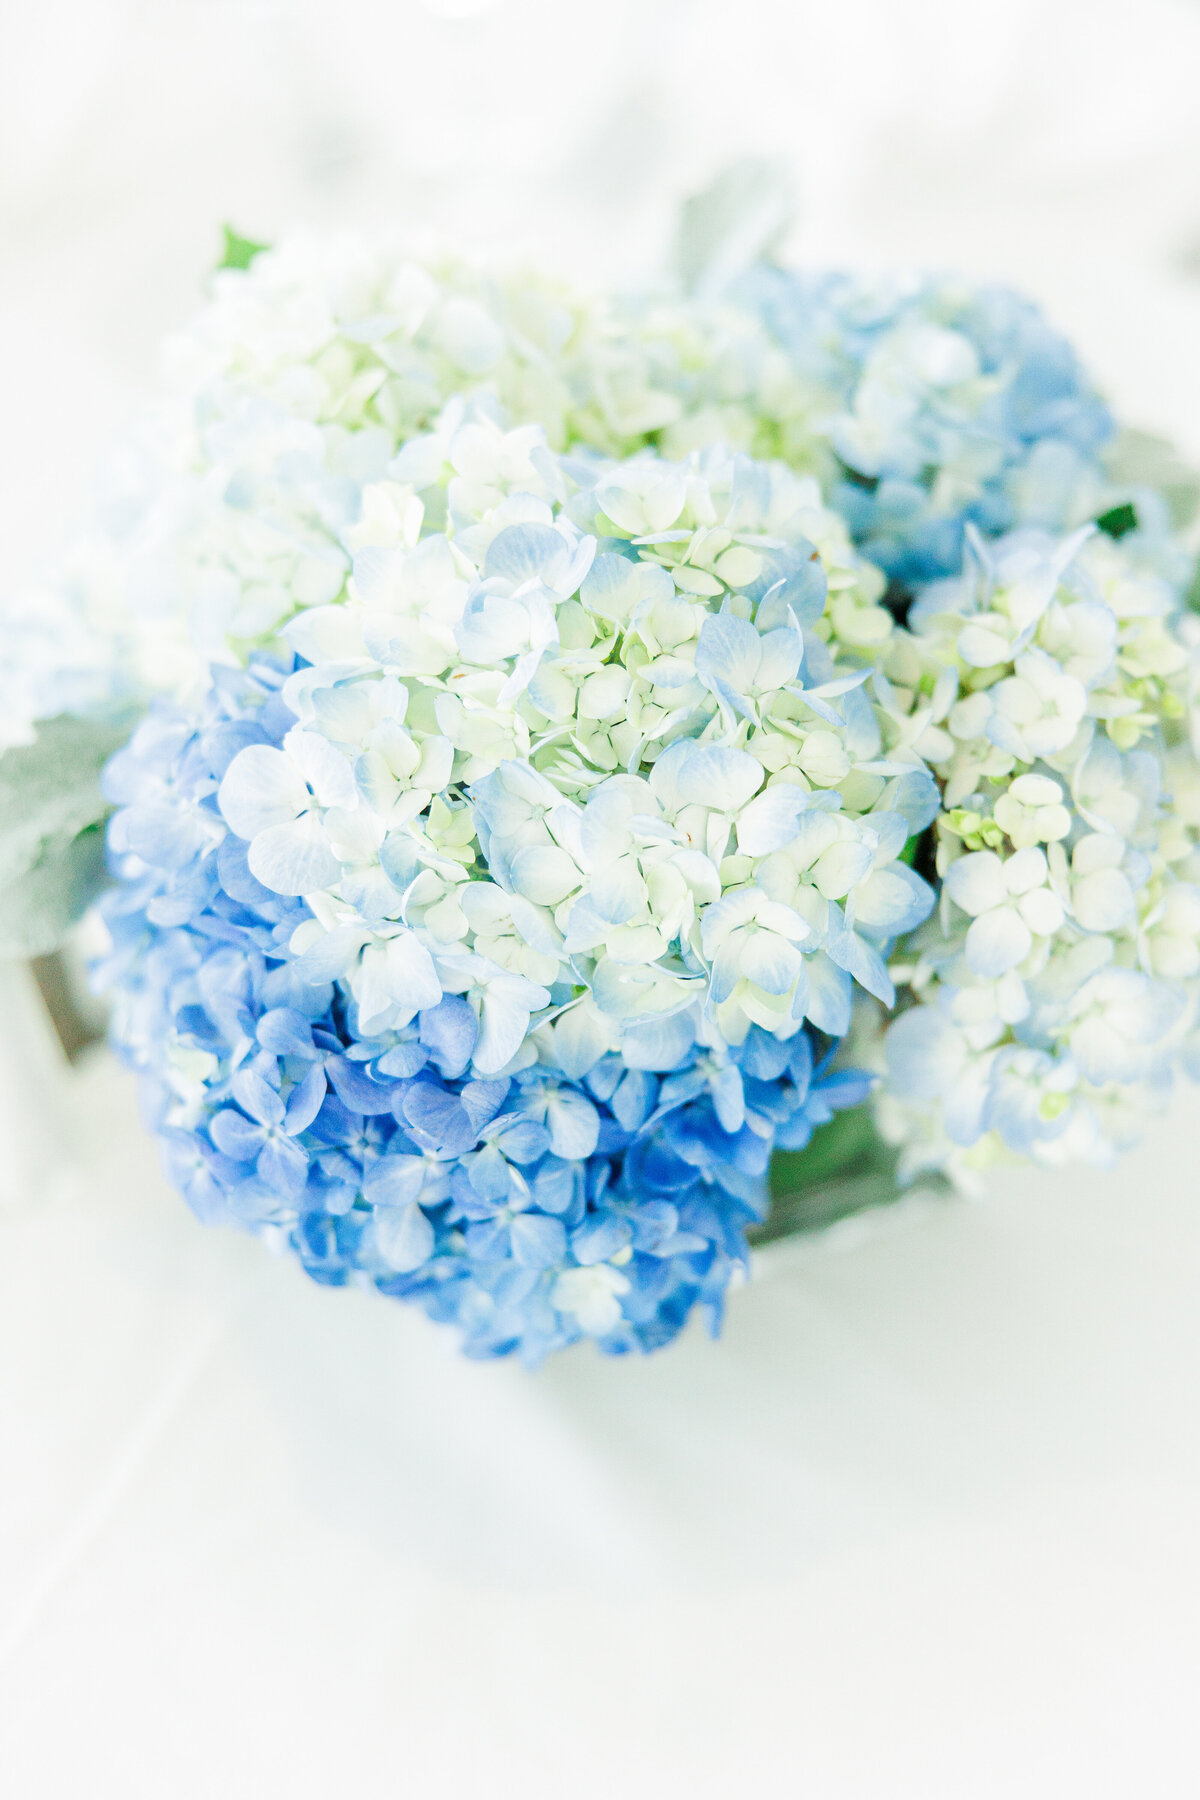 Blue hydrangea centerpieces during a South Shore Country Club wedding reception